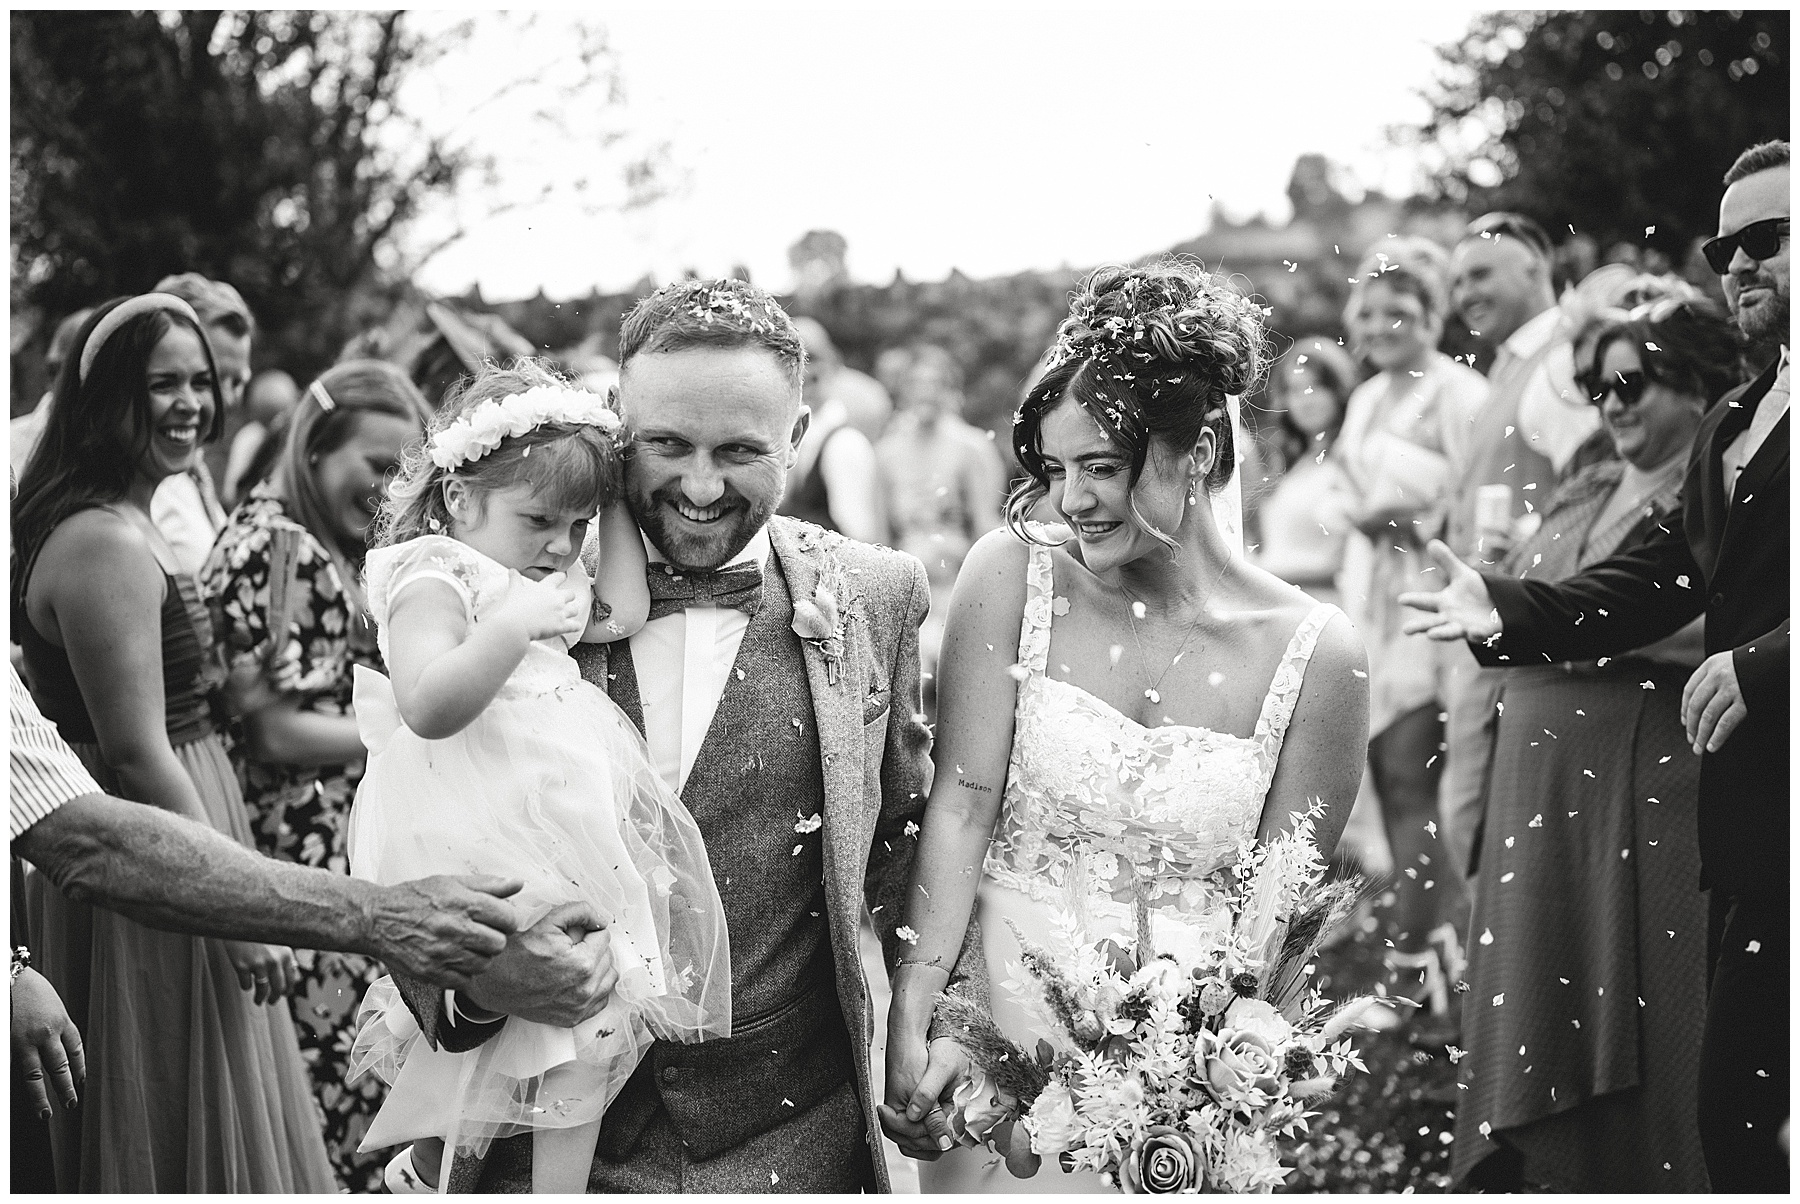 Wedding Confetti at Lyde Court